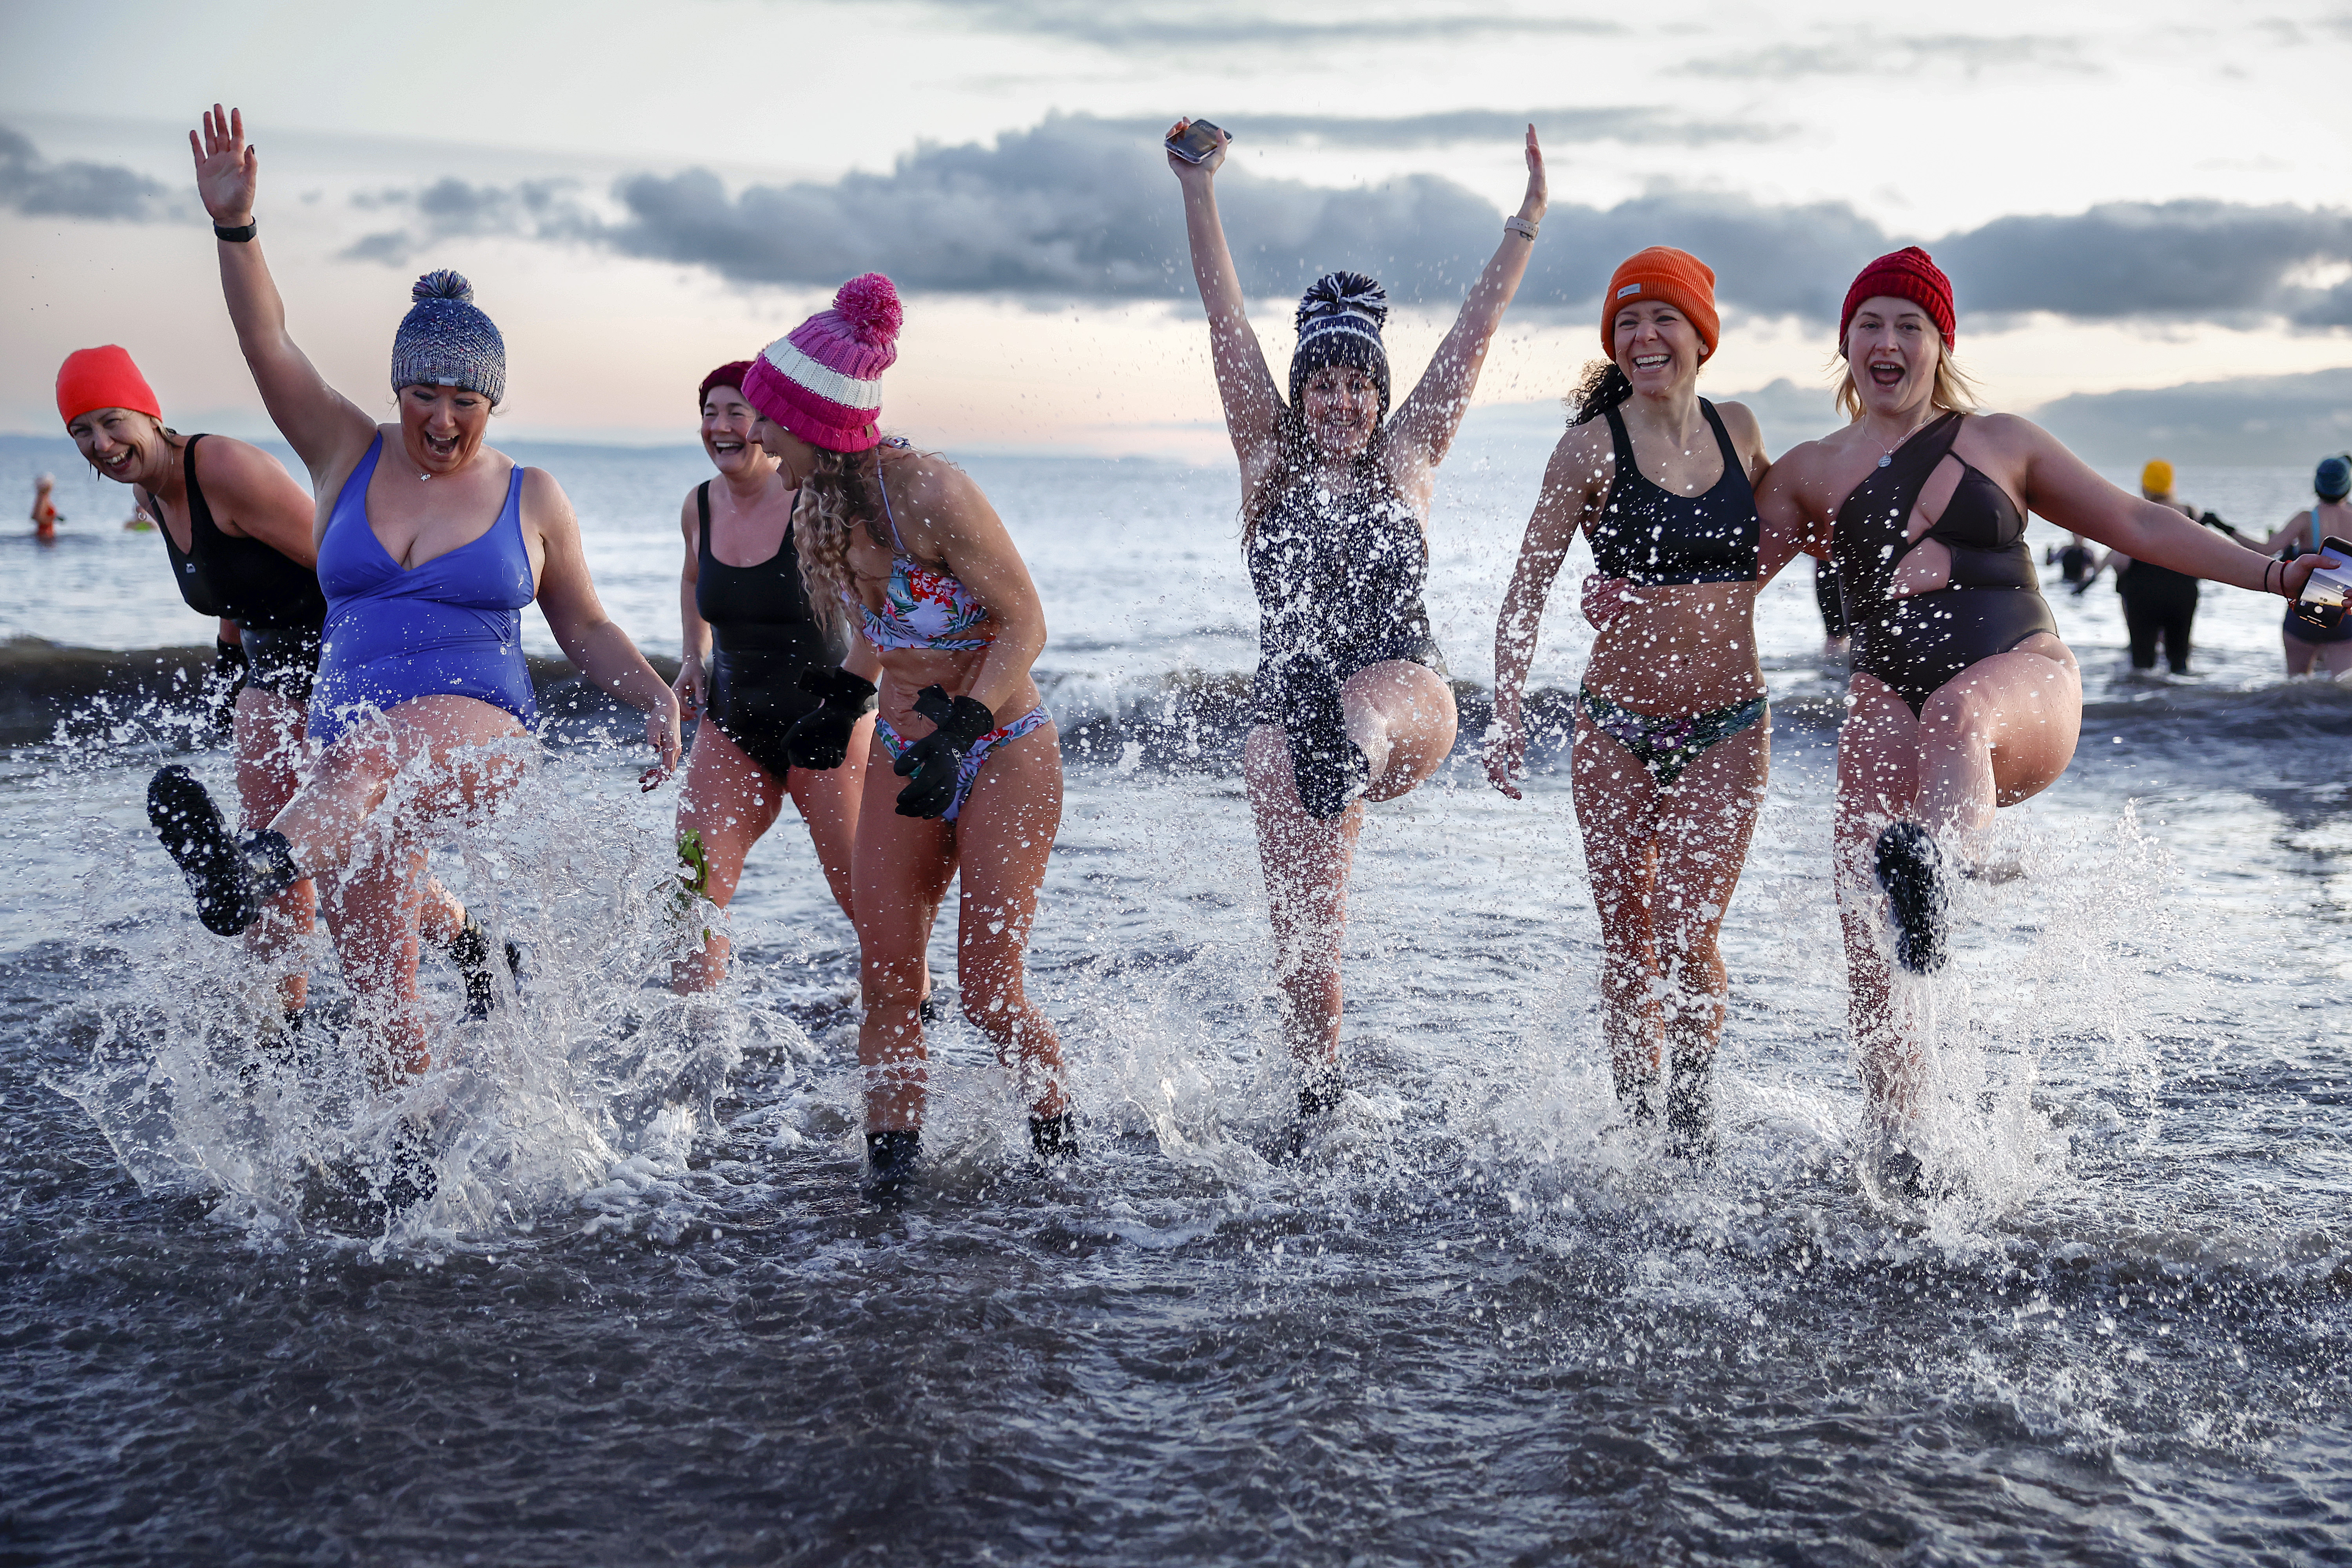 Edinburgh March 8: Hundreds of swimmers took a sunrise dip in the North Sea at Portobello Beach, for the International Women’s Day on March 8, 2023 in Edinburgh. The event was organised as a fundraiser for Women's Aid, which aims to end domestic violence against women and children. (Photo by Jeff J Mitchell/Getty Images)